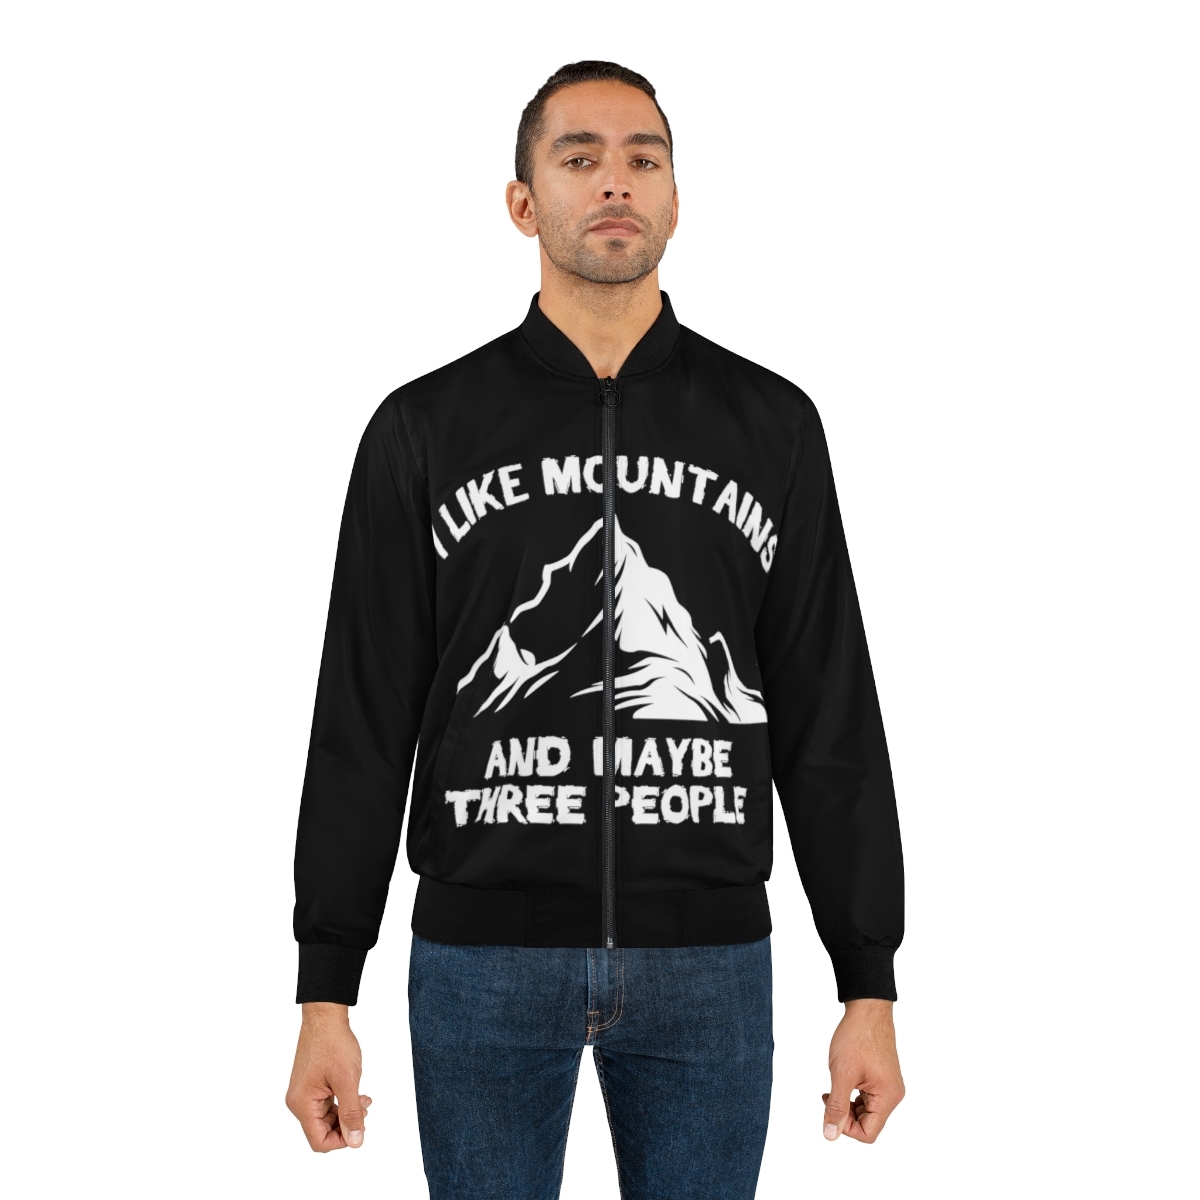 Primary image for Men's All-Over Print Bomber Jacket - Mountain and 'Three People' Graphic